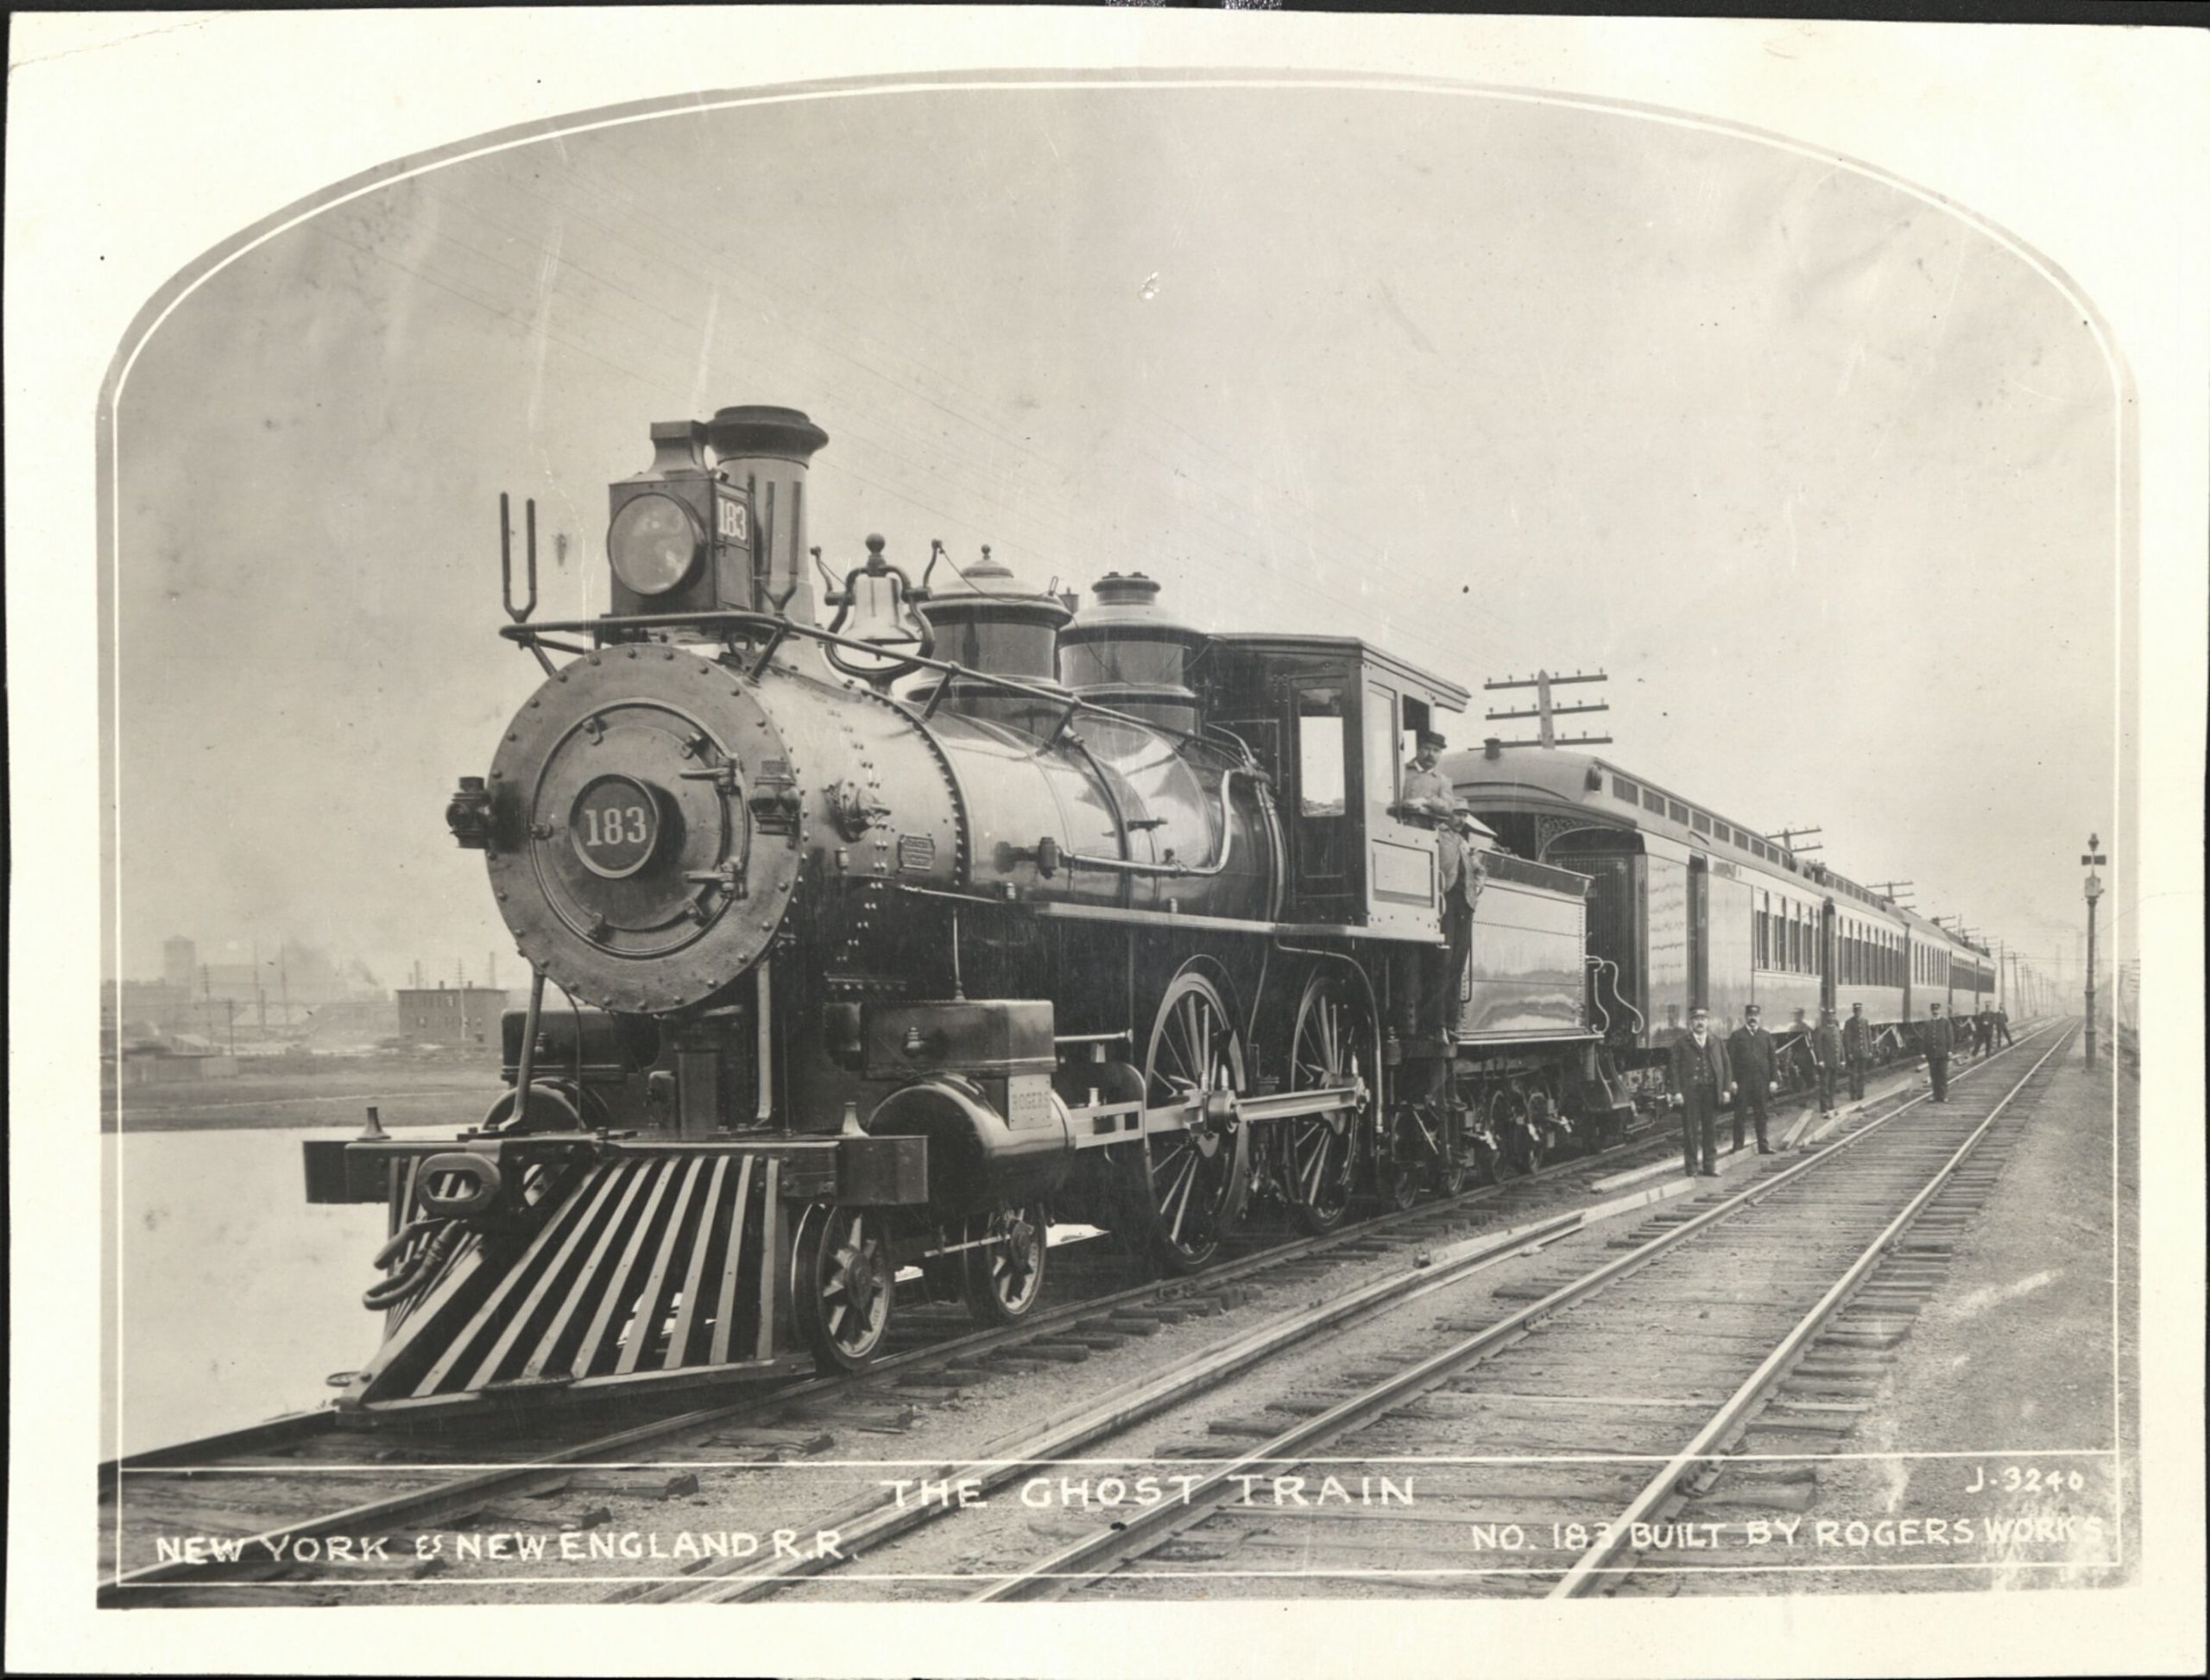 Despite the text on the photograph this is likely the Air Line Limited of the New York and New England Railroad